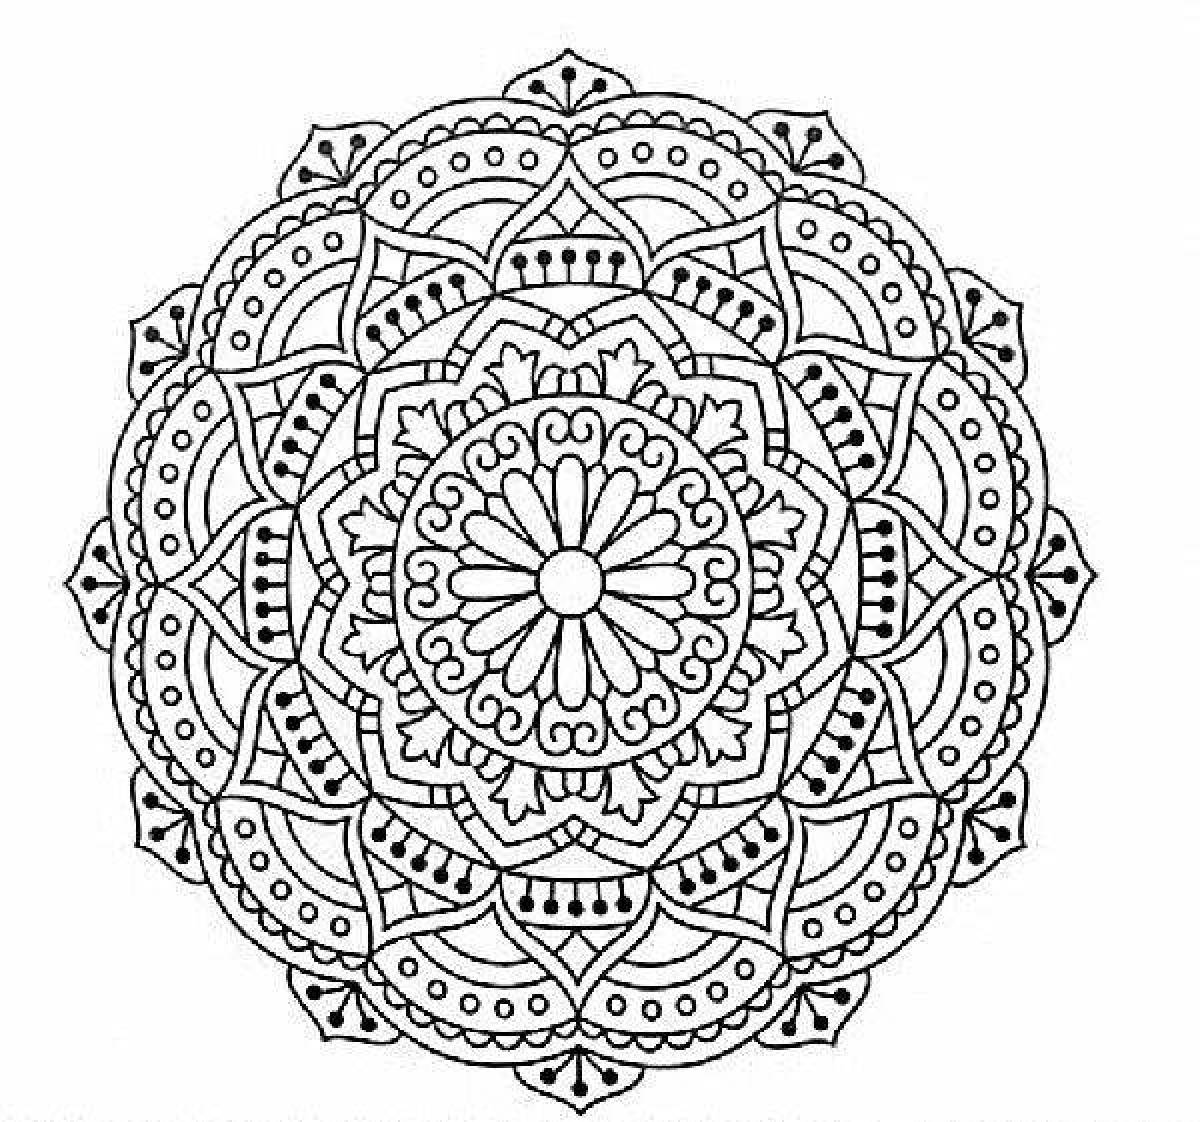 Mandala for good luck and success in everything #2